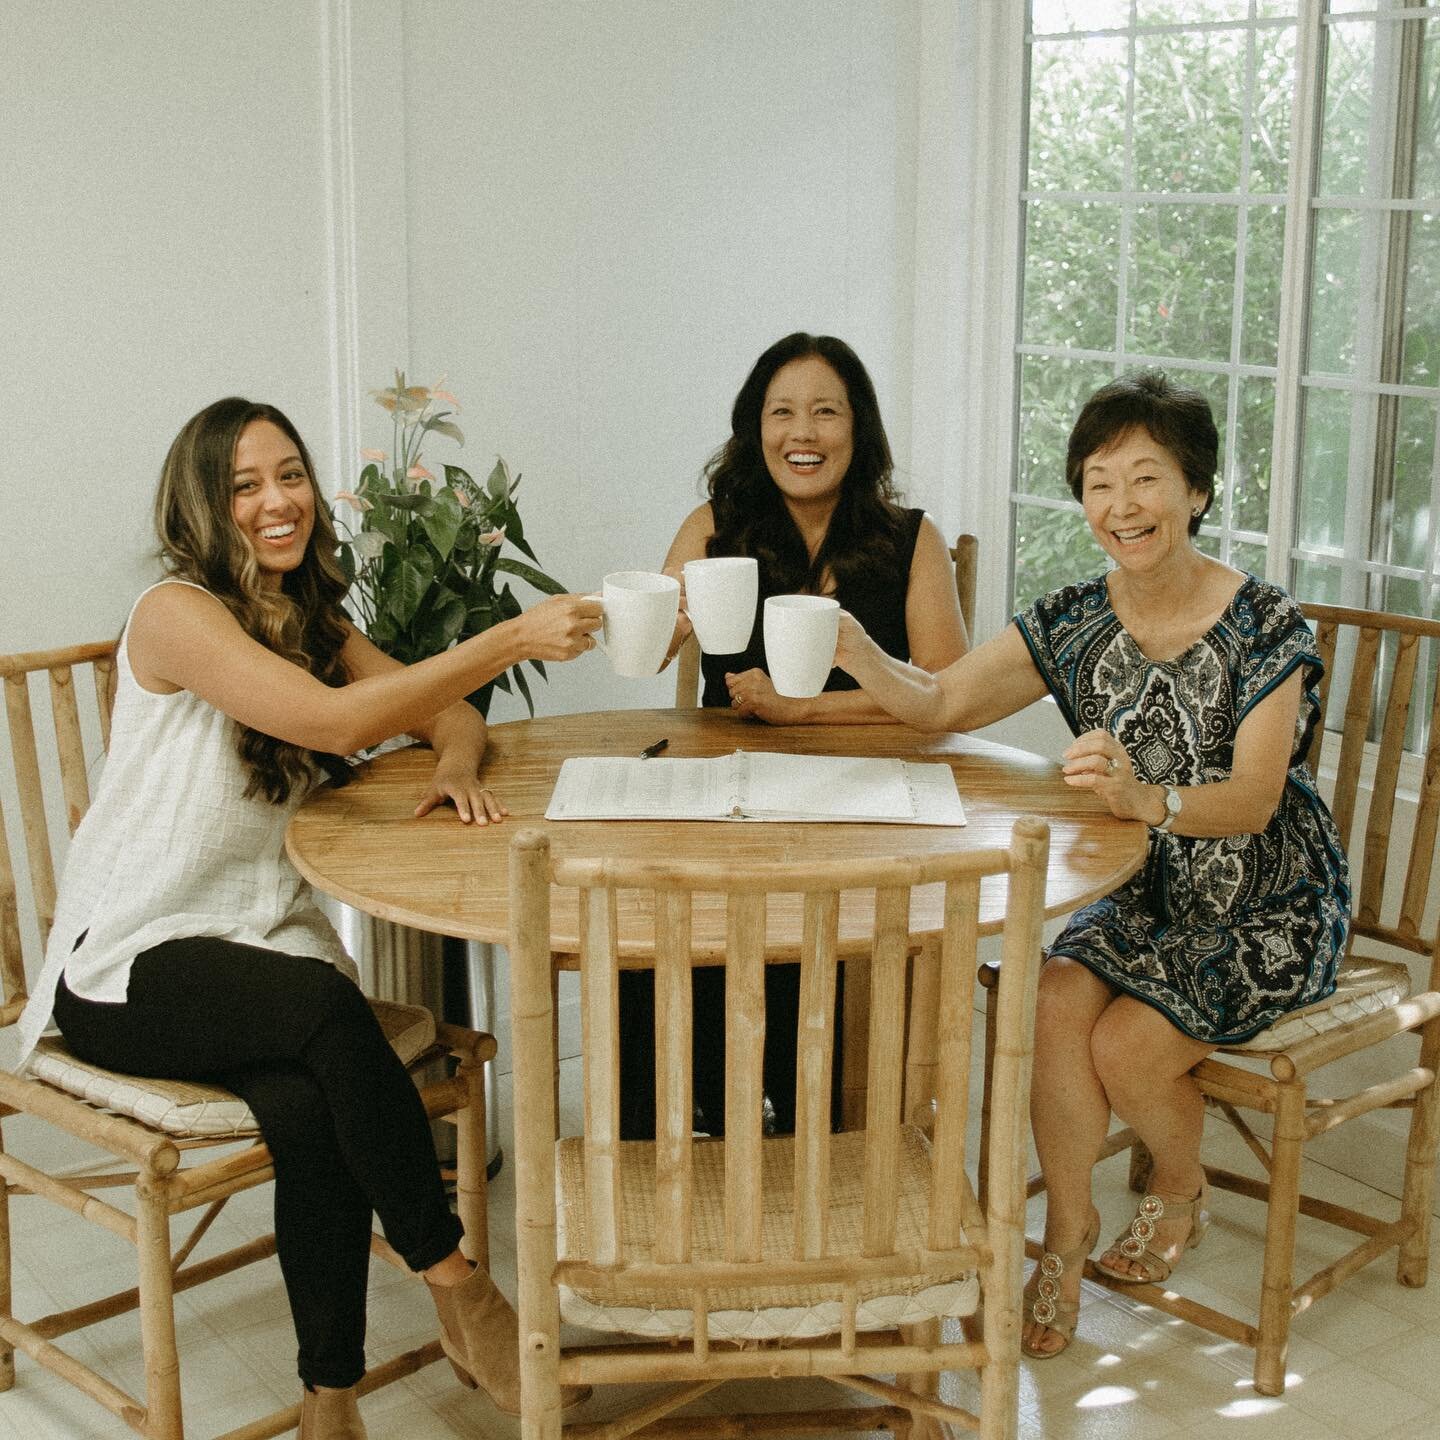 Cheers! ☕️ We are back online and want to take a moment to briefly introduce ourselves.
﻿﻿
﻿﻿We&rsquo;ve got a close-knit talented trio of women consisting of Carol, Juli, and Jenn.
﻿﻿
﻿﻿Carol who founded the company in 1984 is semi-retired, but stil